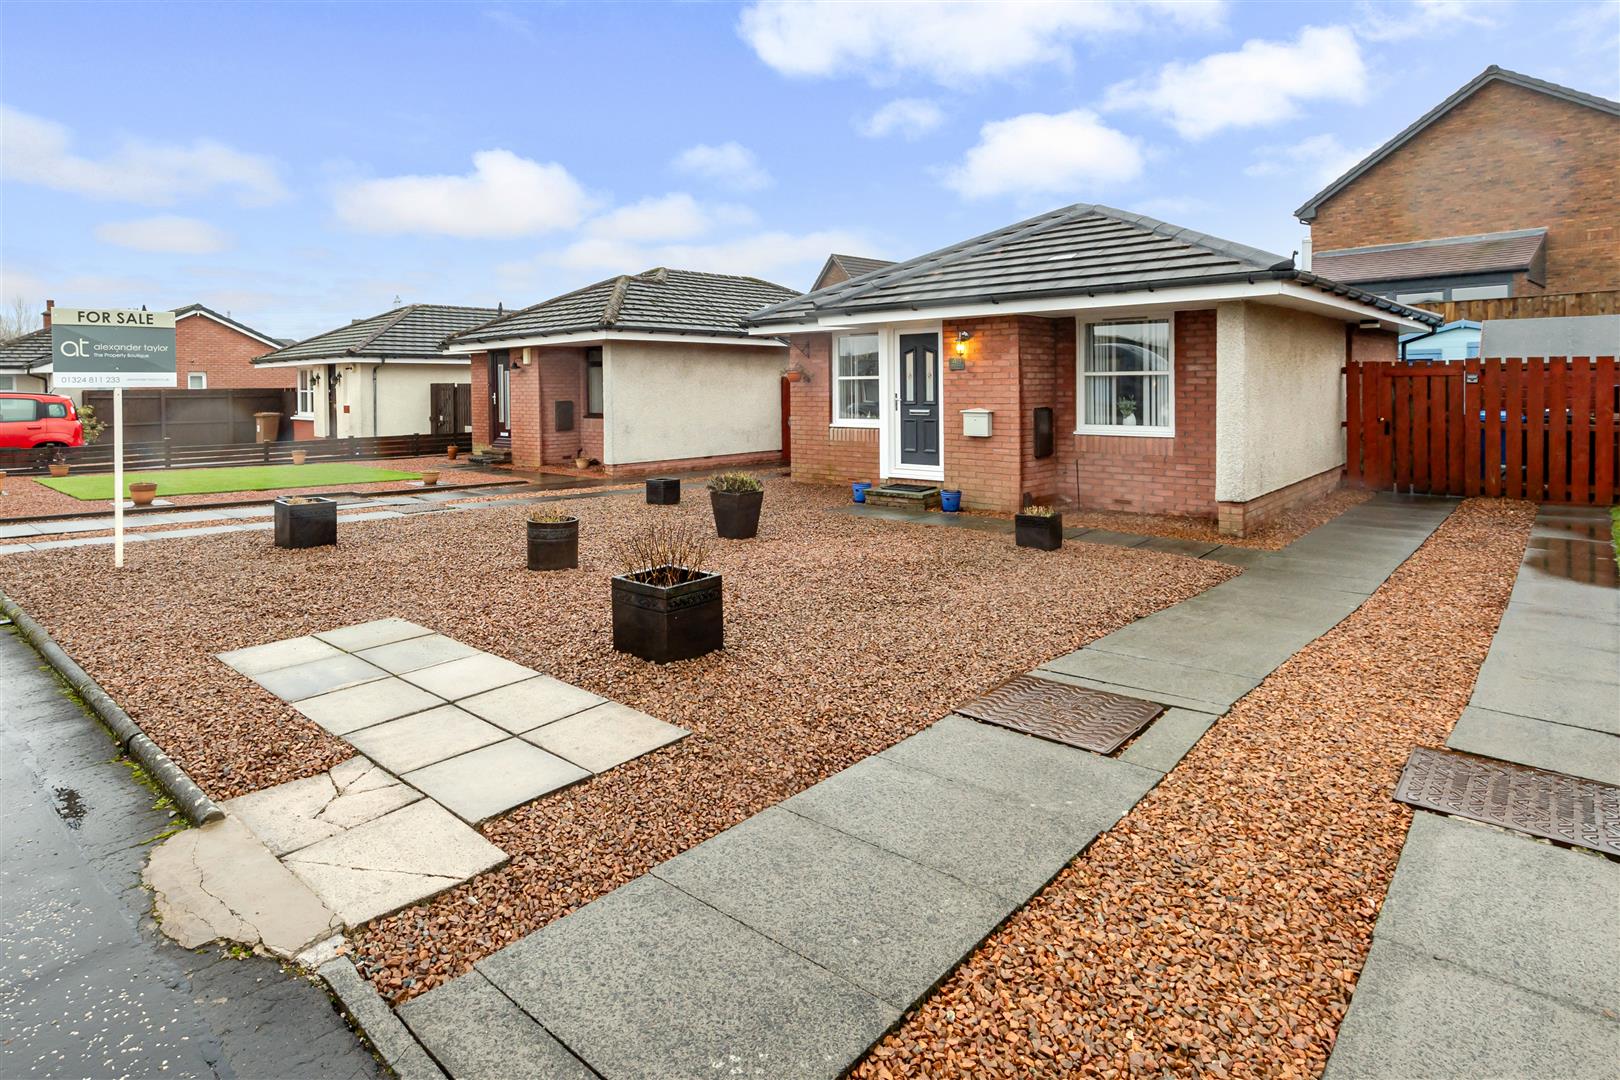 2 bed detached bungalow for sale in Chambers Drive, Falkirk 0